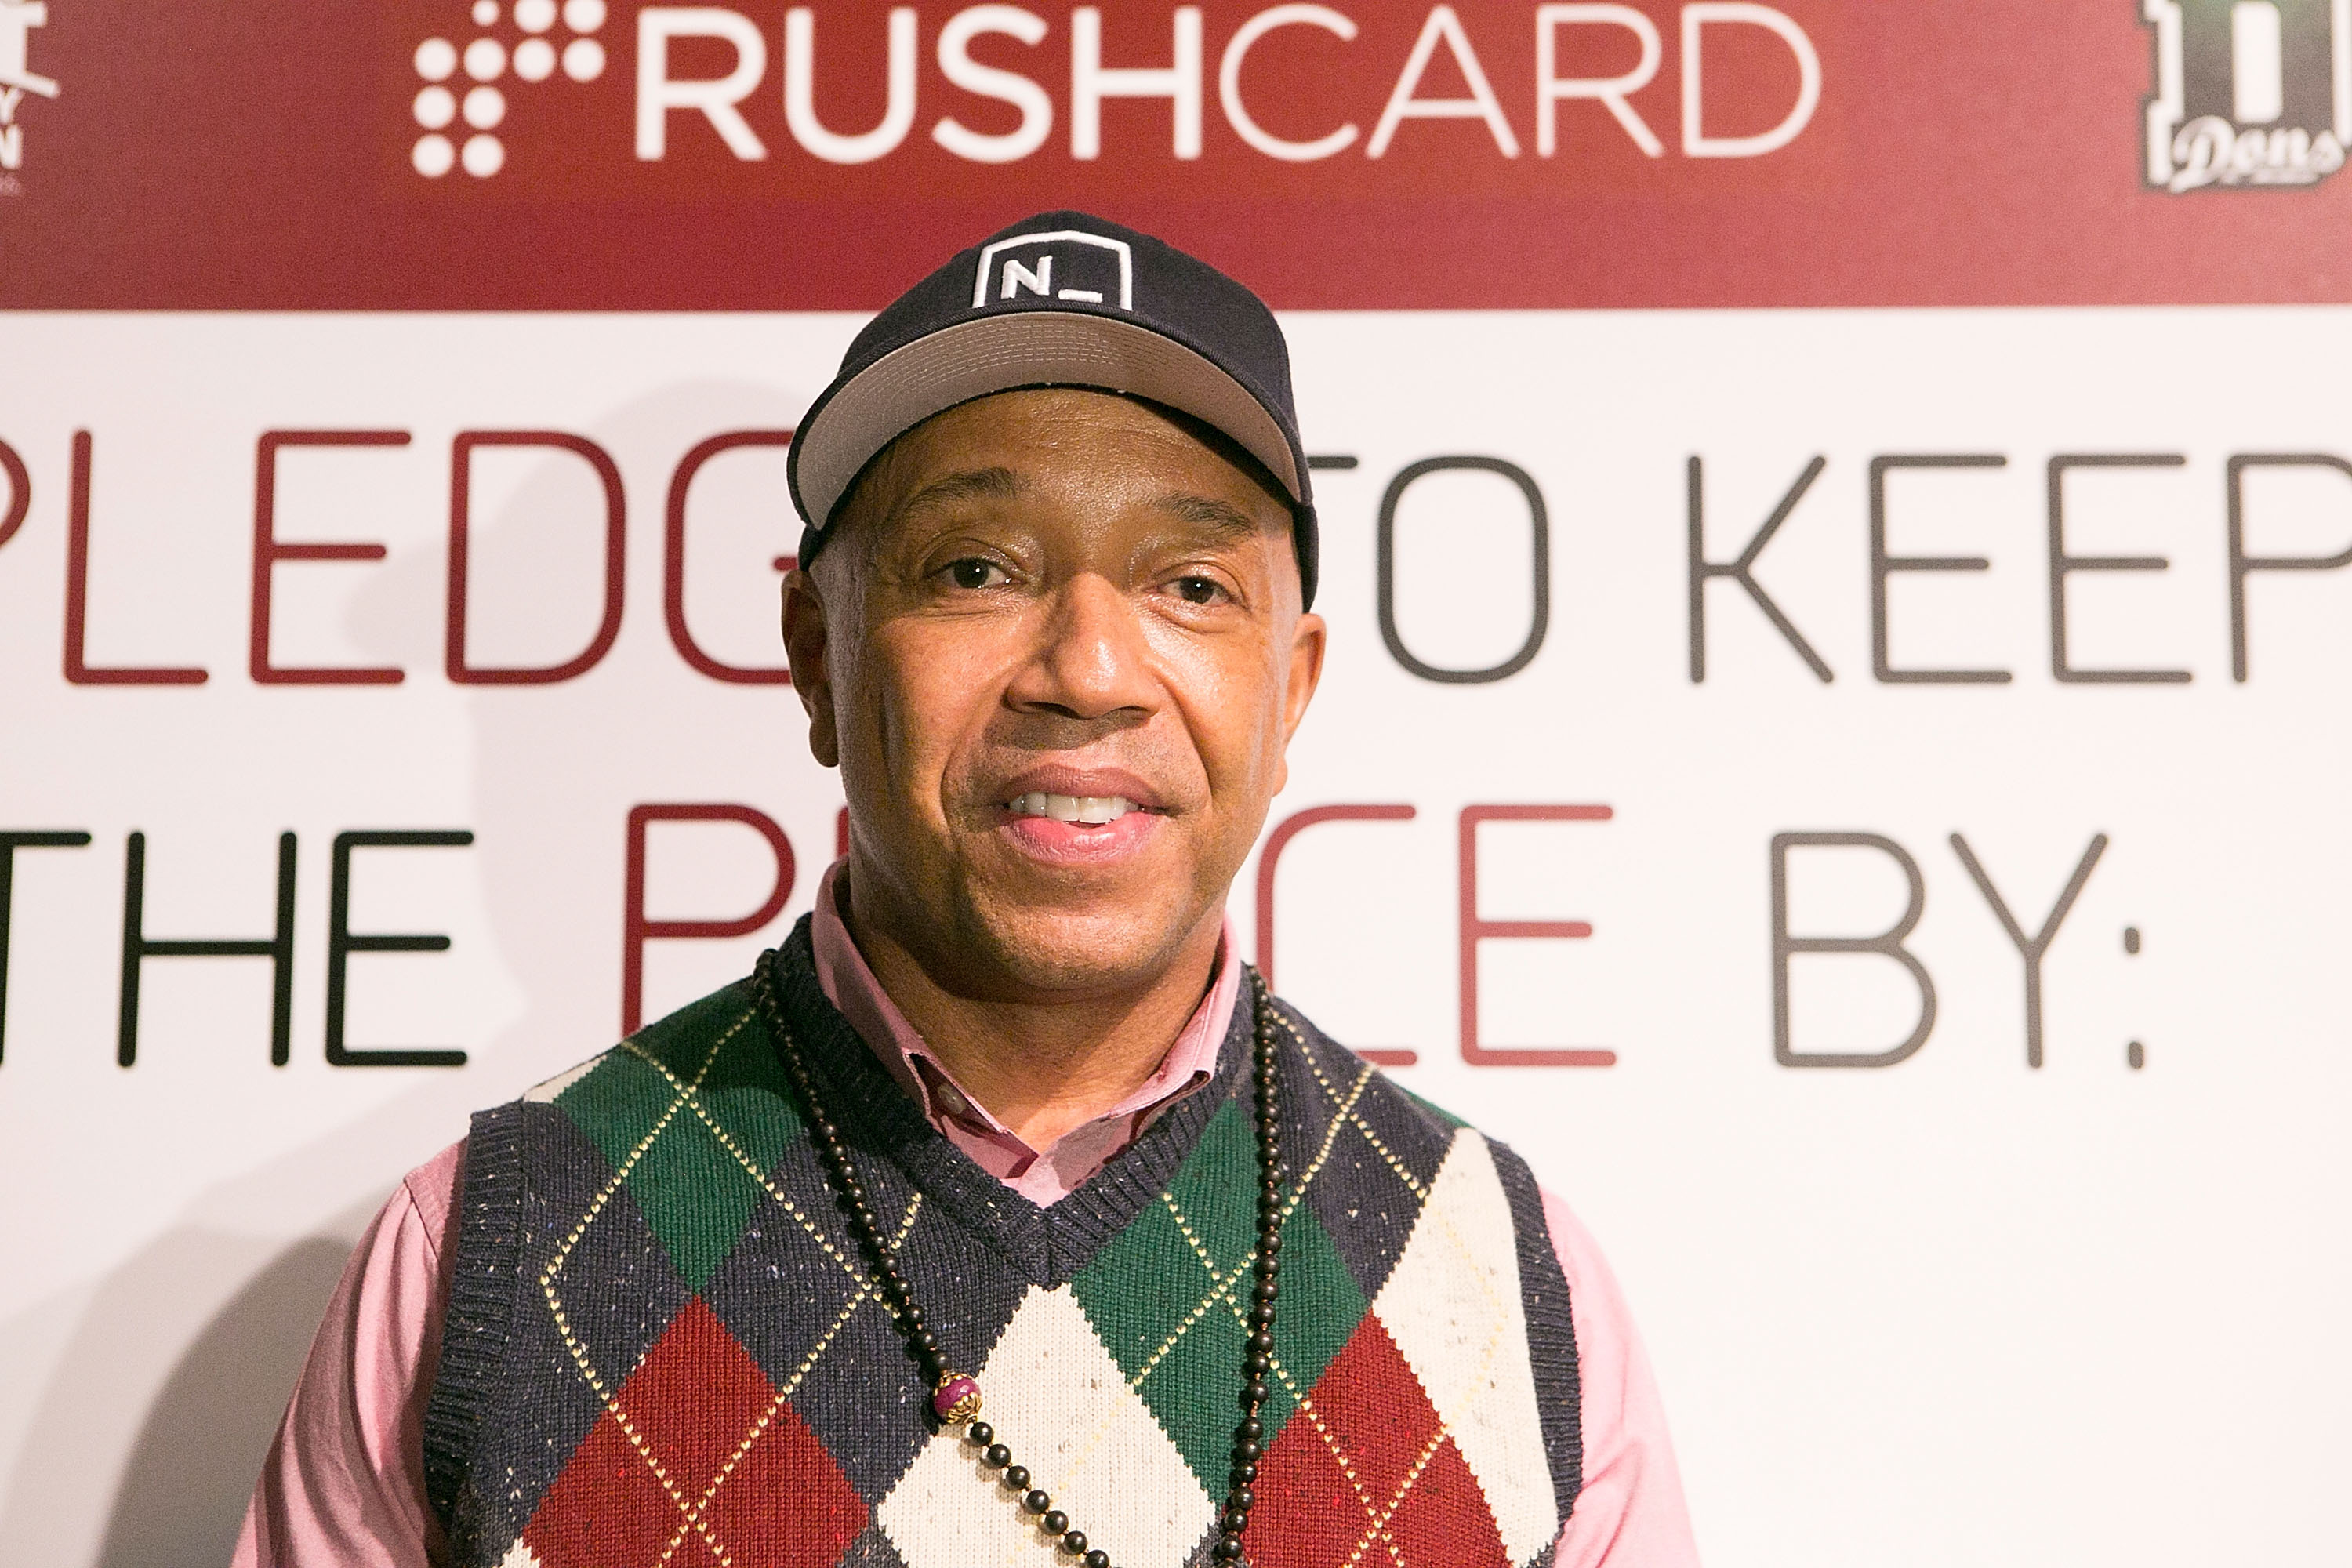 RushCard Locking People Out of Accounts, Putting People on Hold